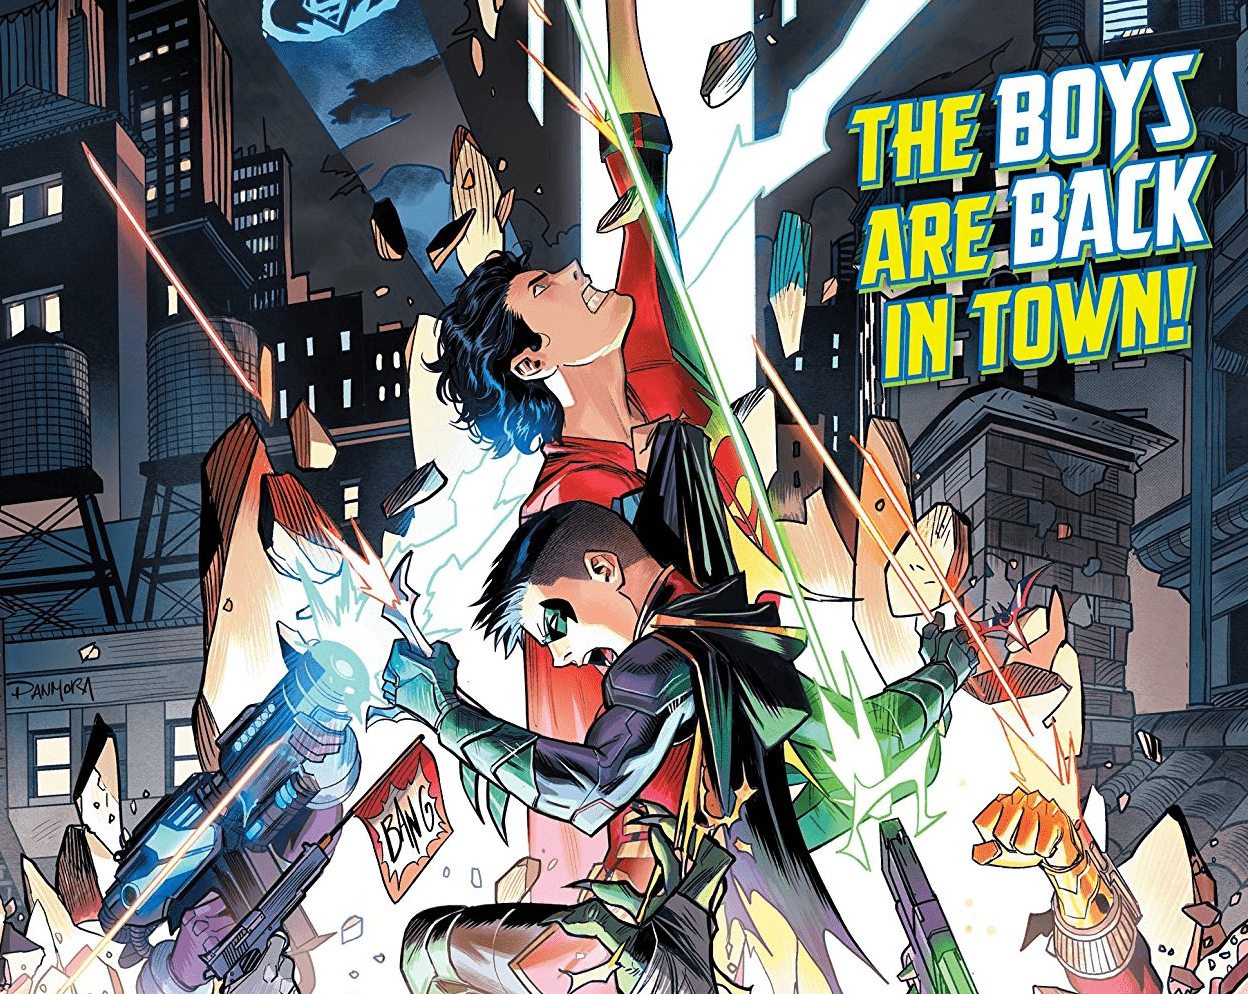 Peter J. Tomasi Talks Super Sons, Super Dads, and Detectives at NYCC